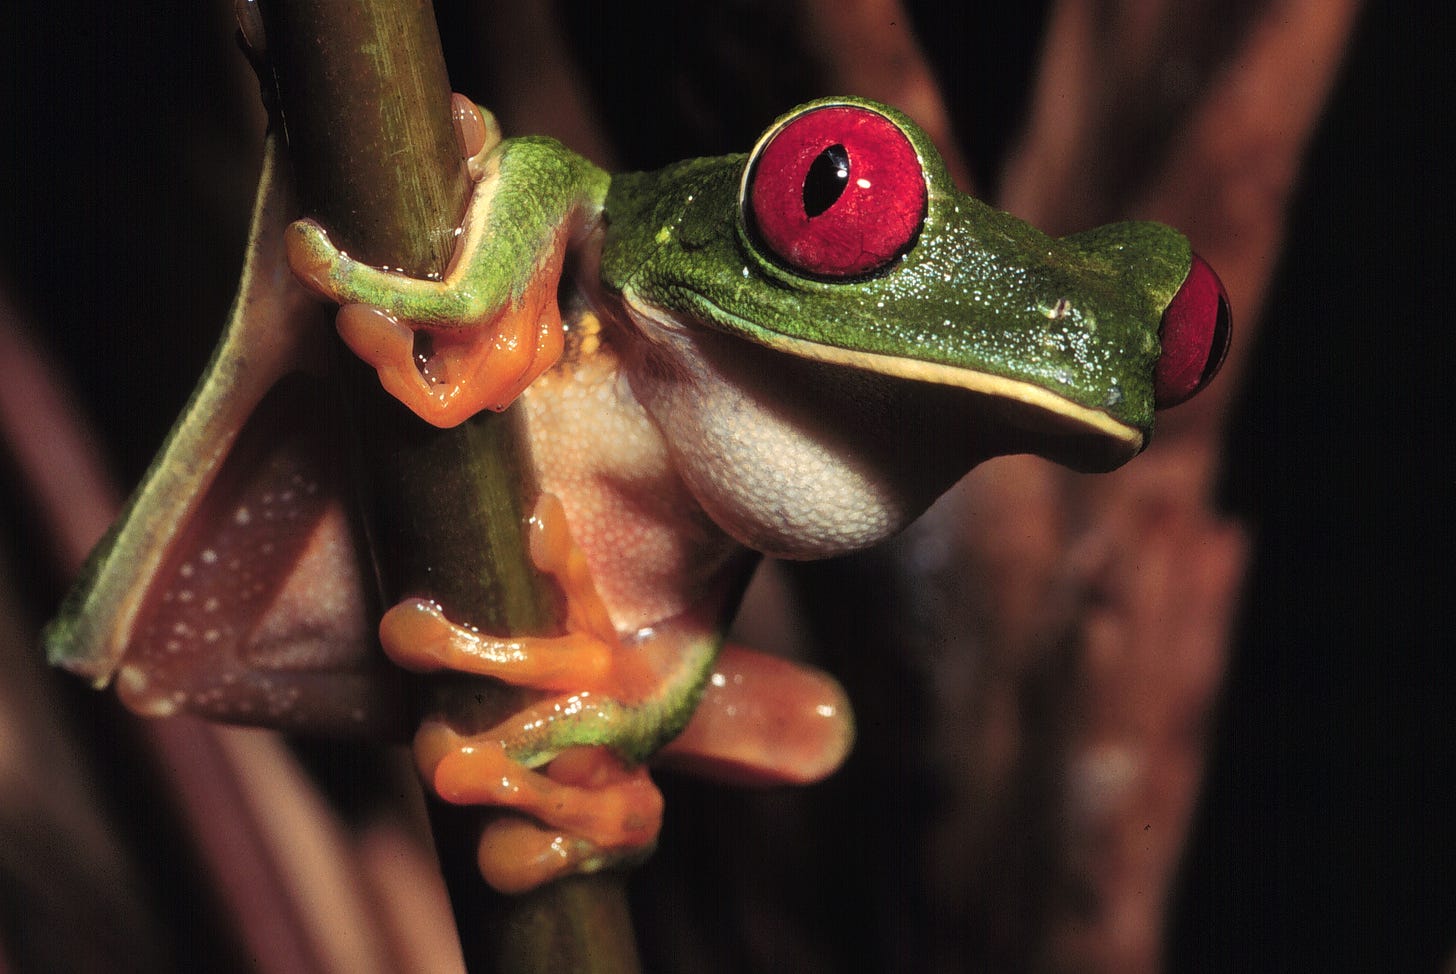 Red-eyed treefrog. I already used this photo in a post, but it's one of my favorites, and it's the right species.